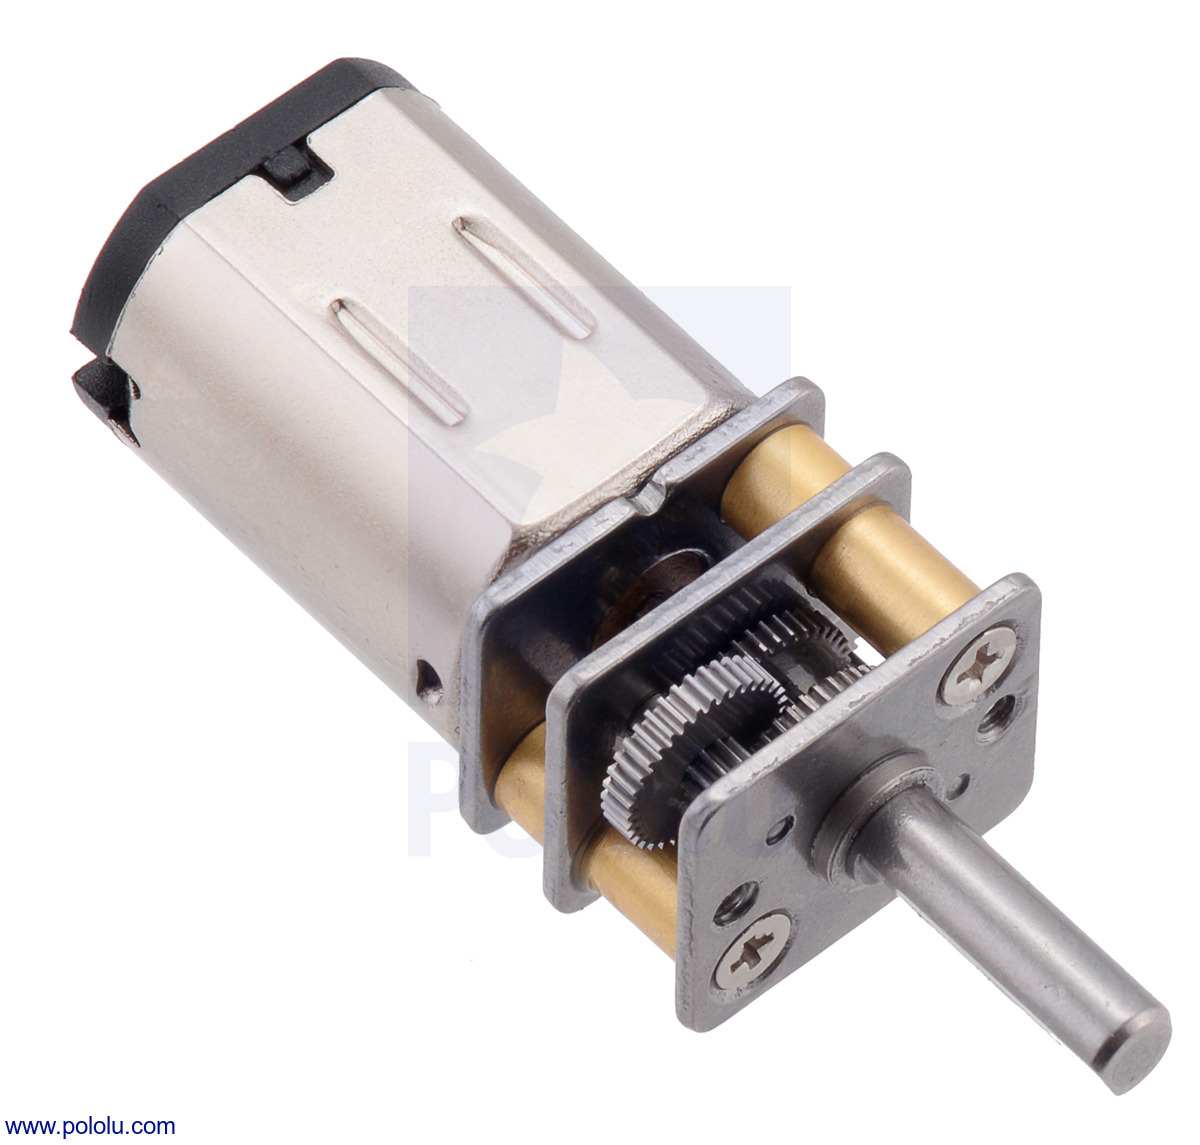 QITA Pololu Micro Metal Gearmotor 6V-12V 45-6000RPM with/without Extended Motor 